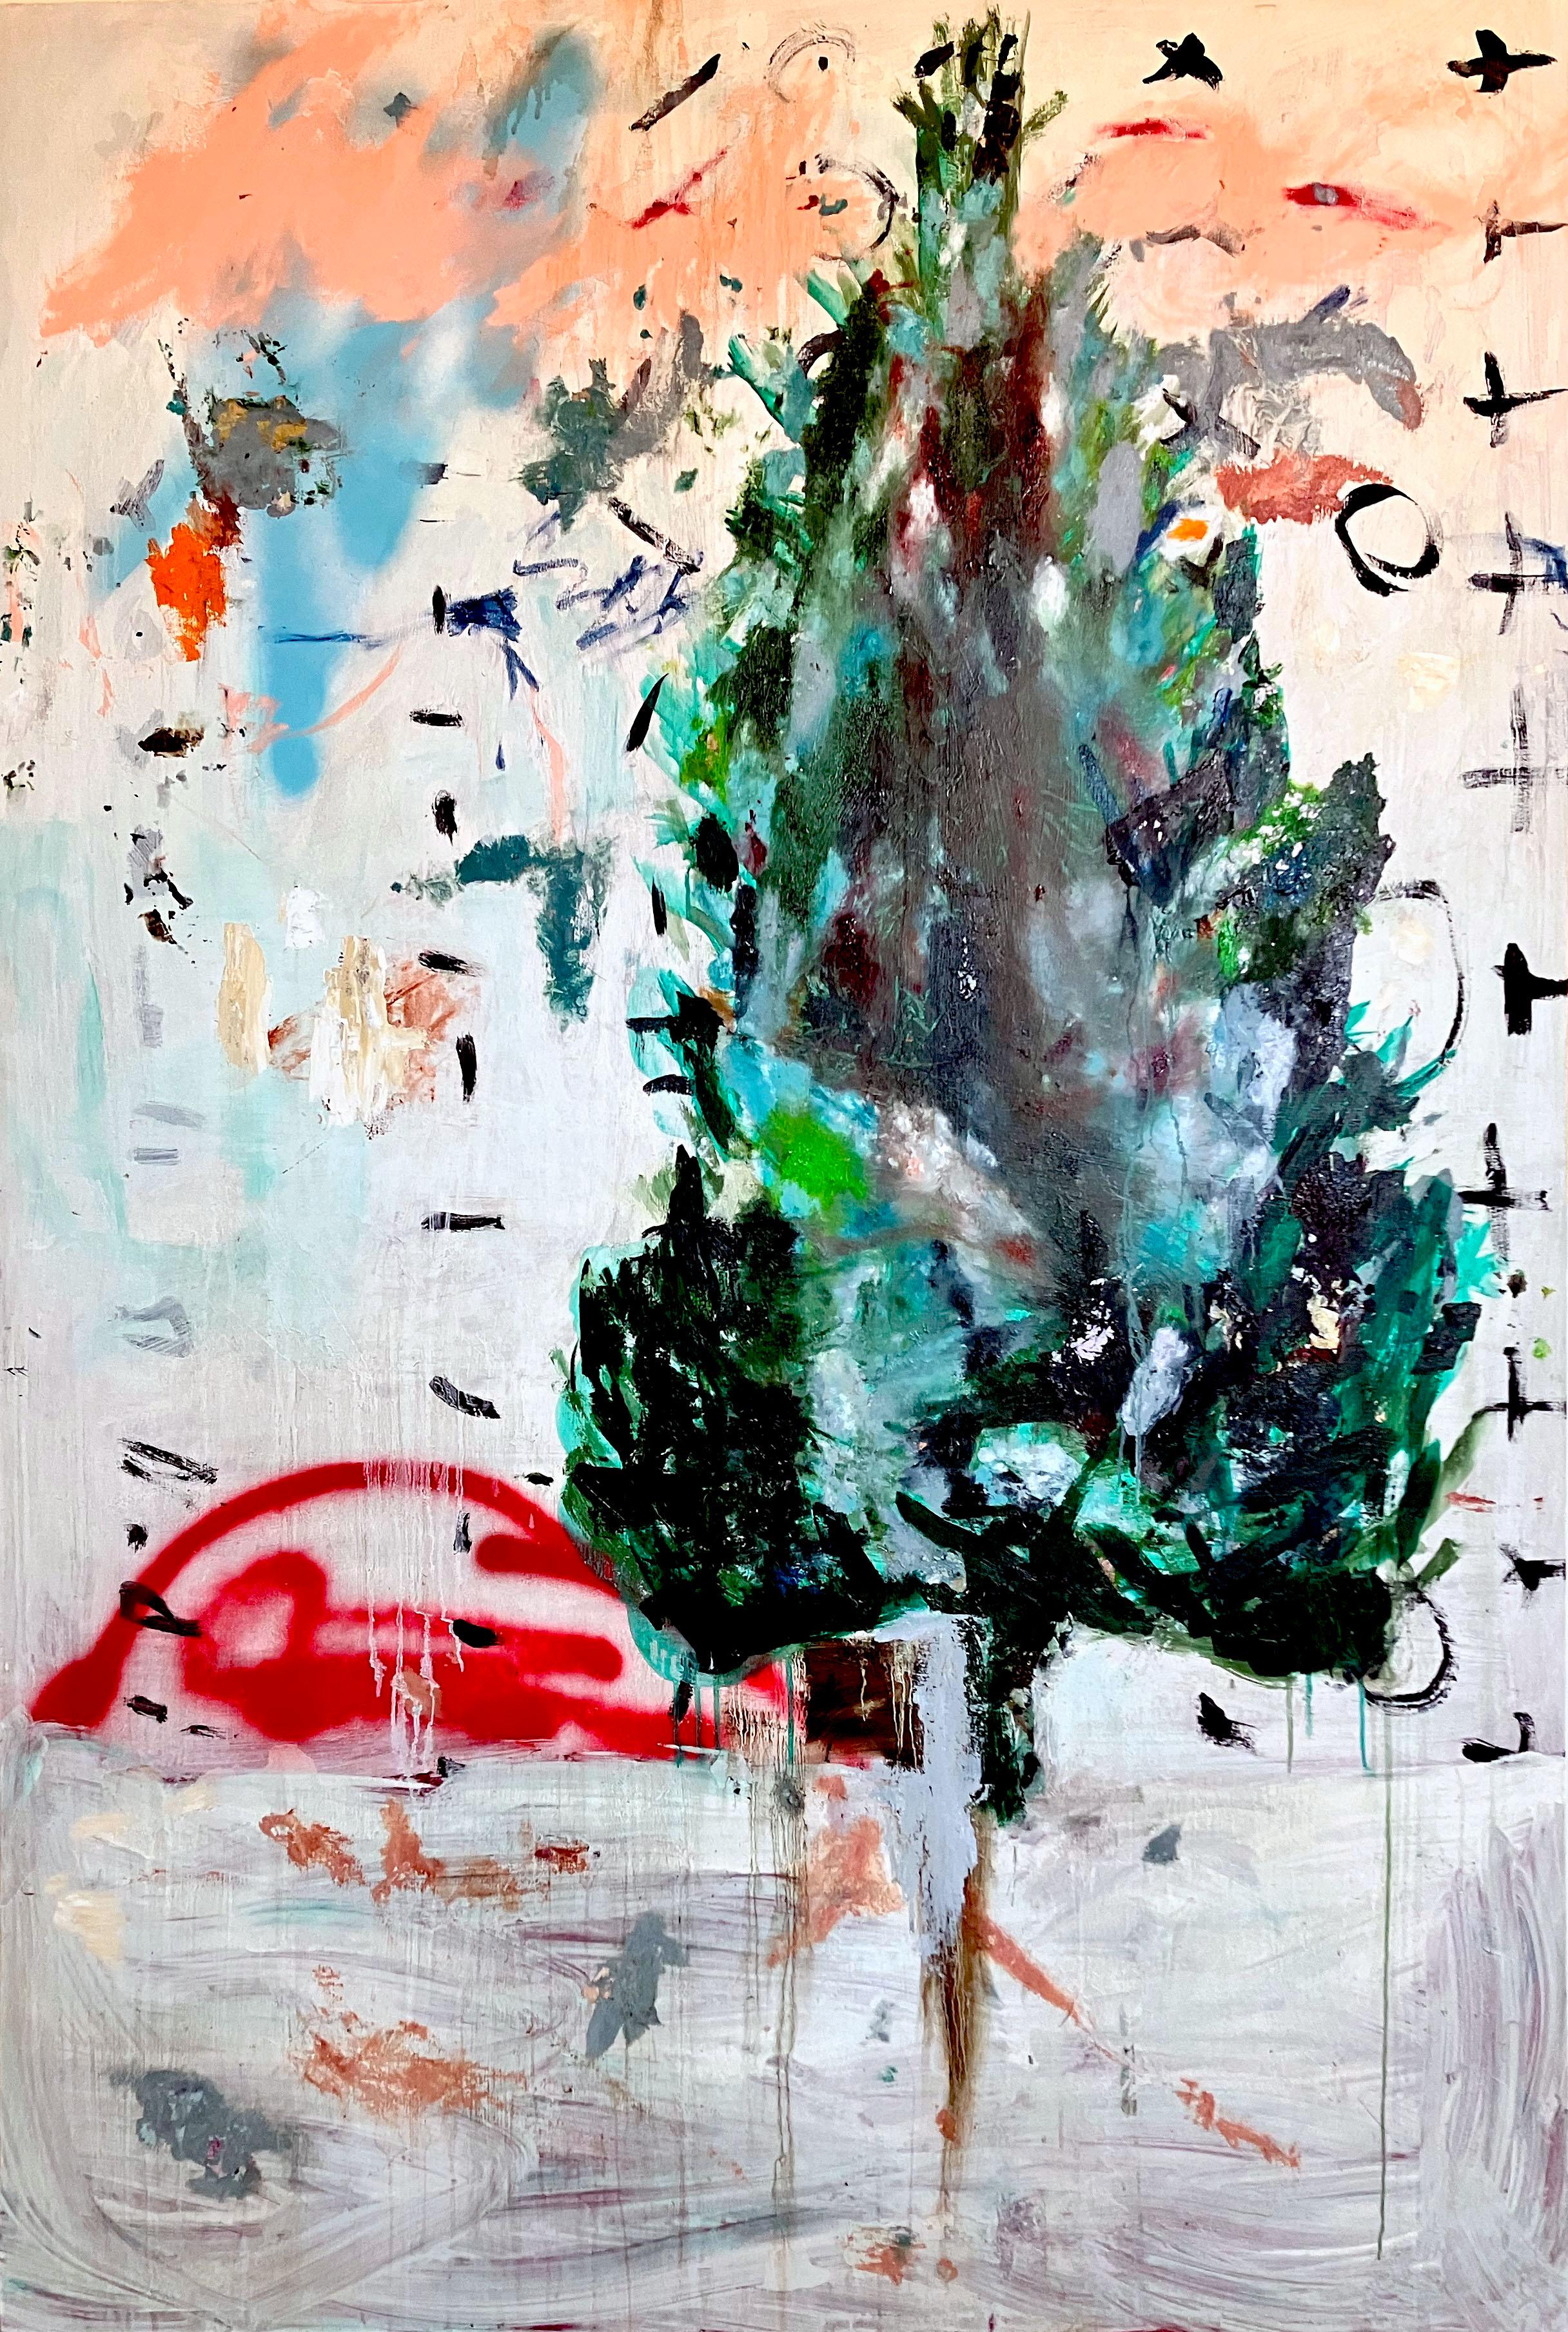 C. Dimitri Abstract Painting - Park, abstracted tree nature image bright touches, graffiti markings